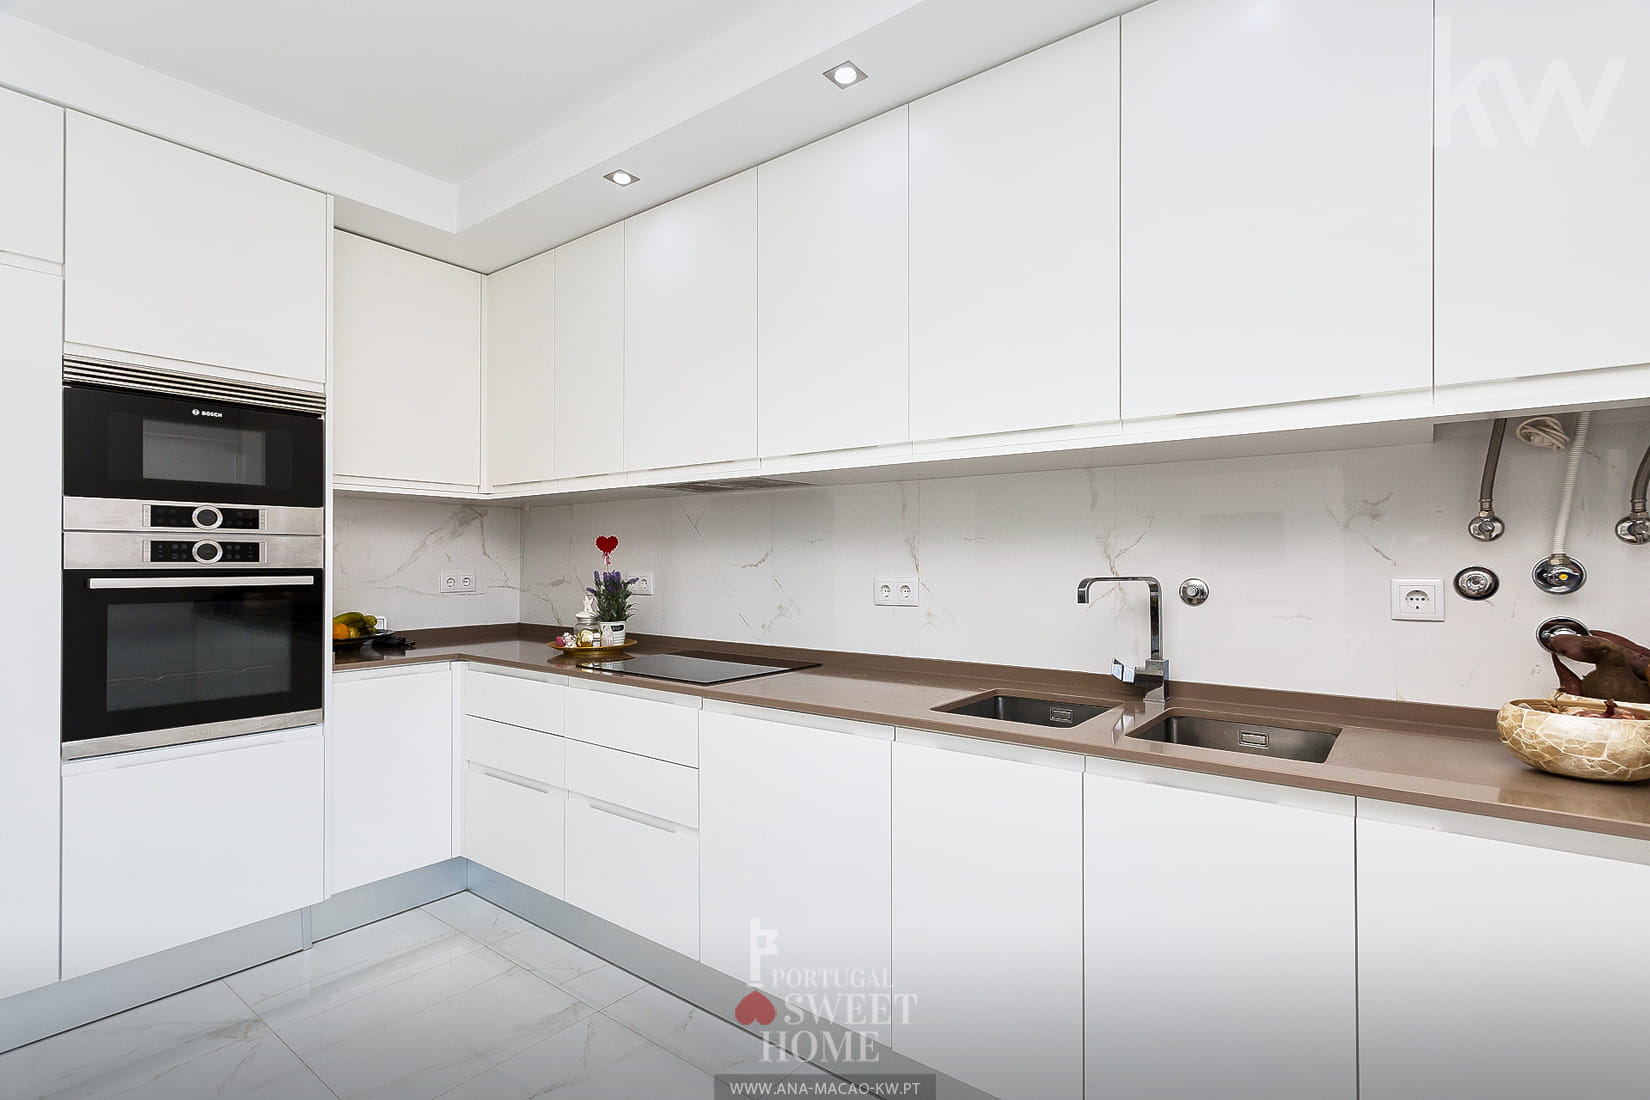 Fully equipped kitchen with Bosh appliances